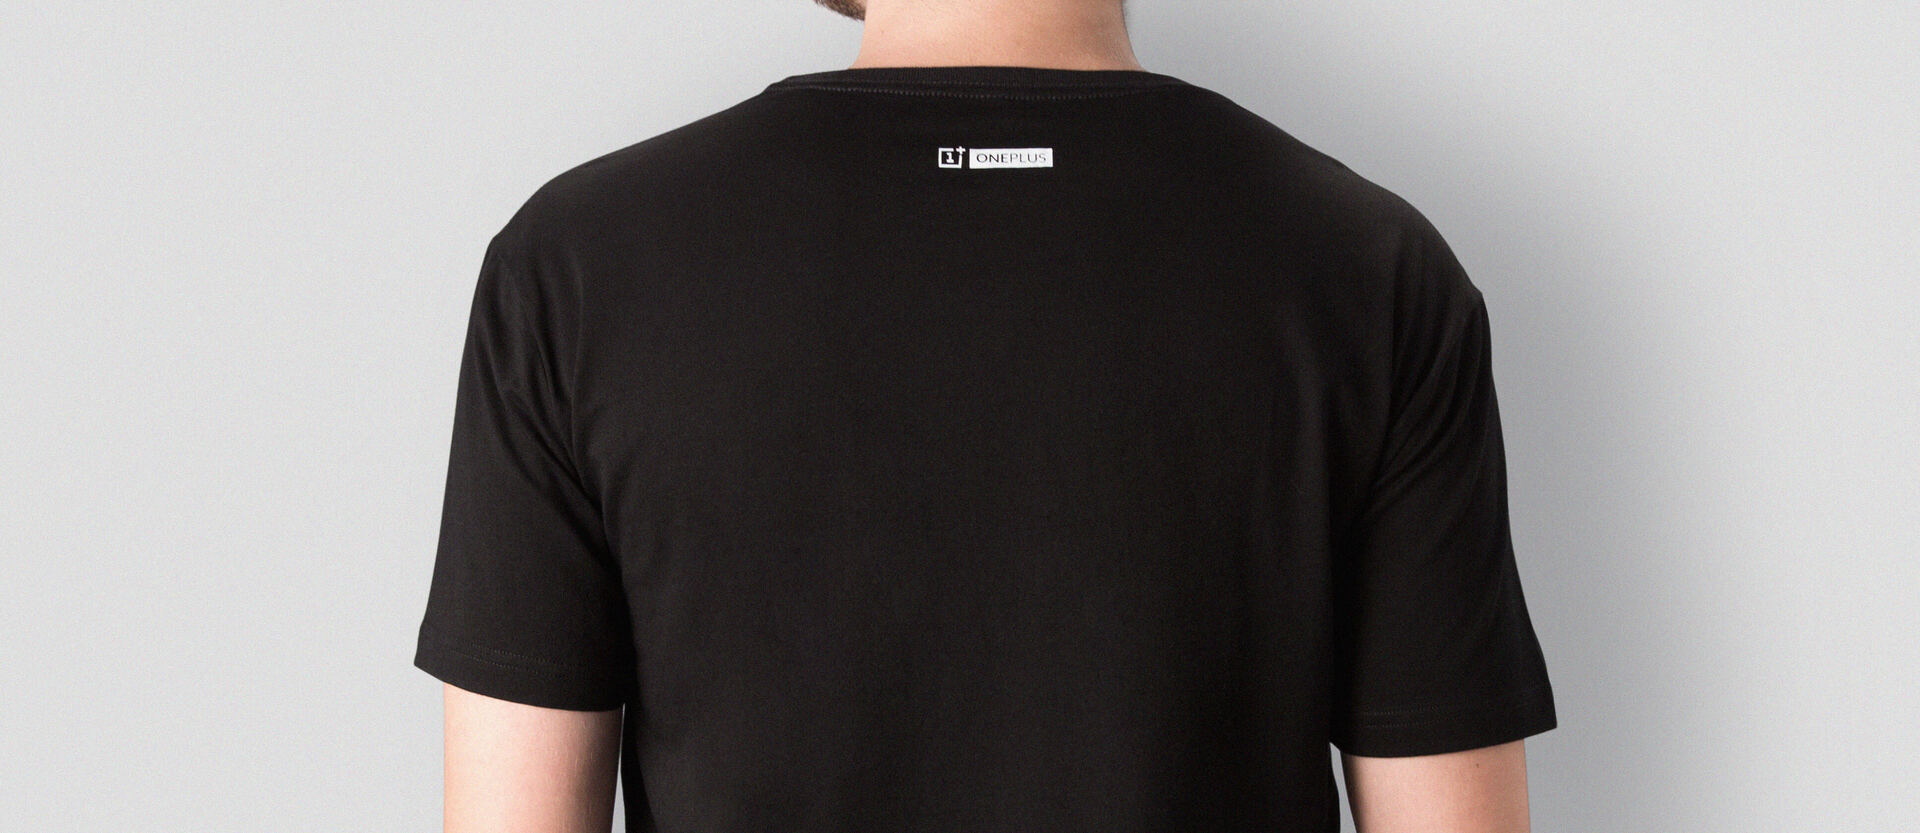 OnePlus Dash Charge T-shirt